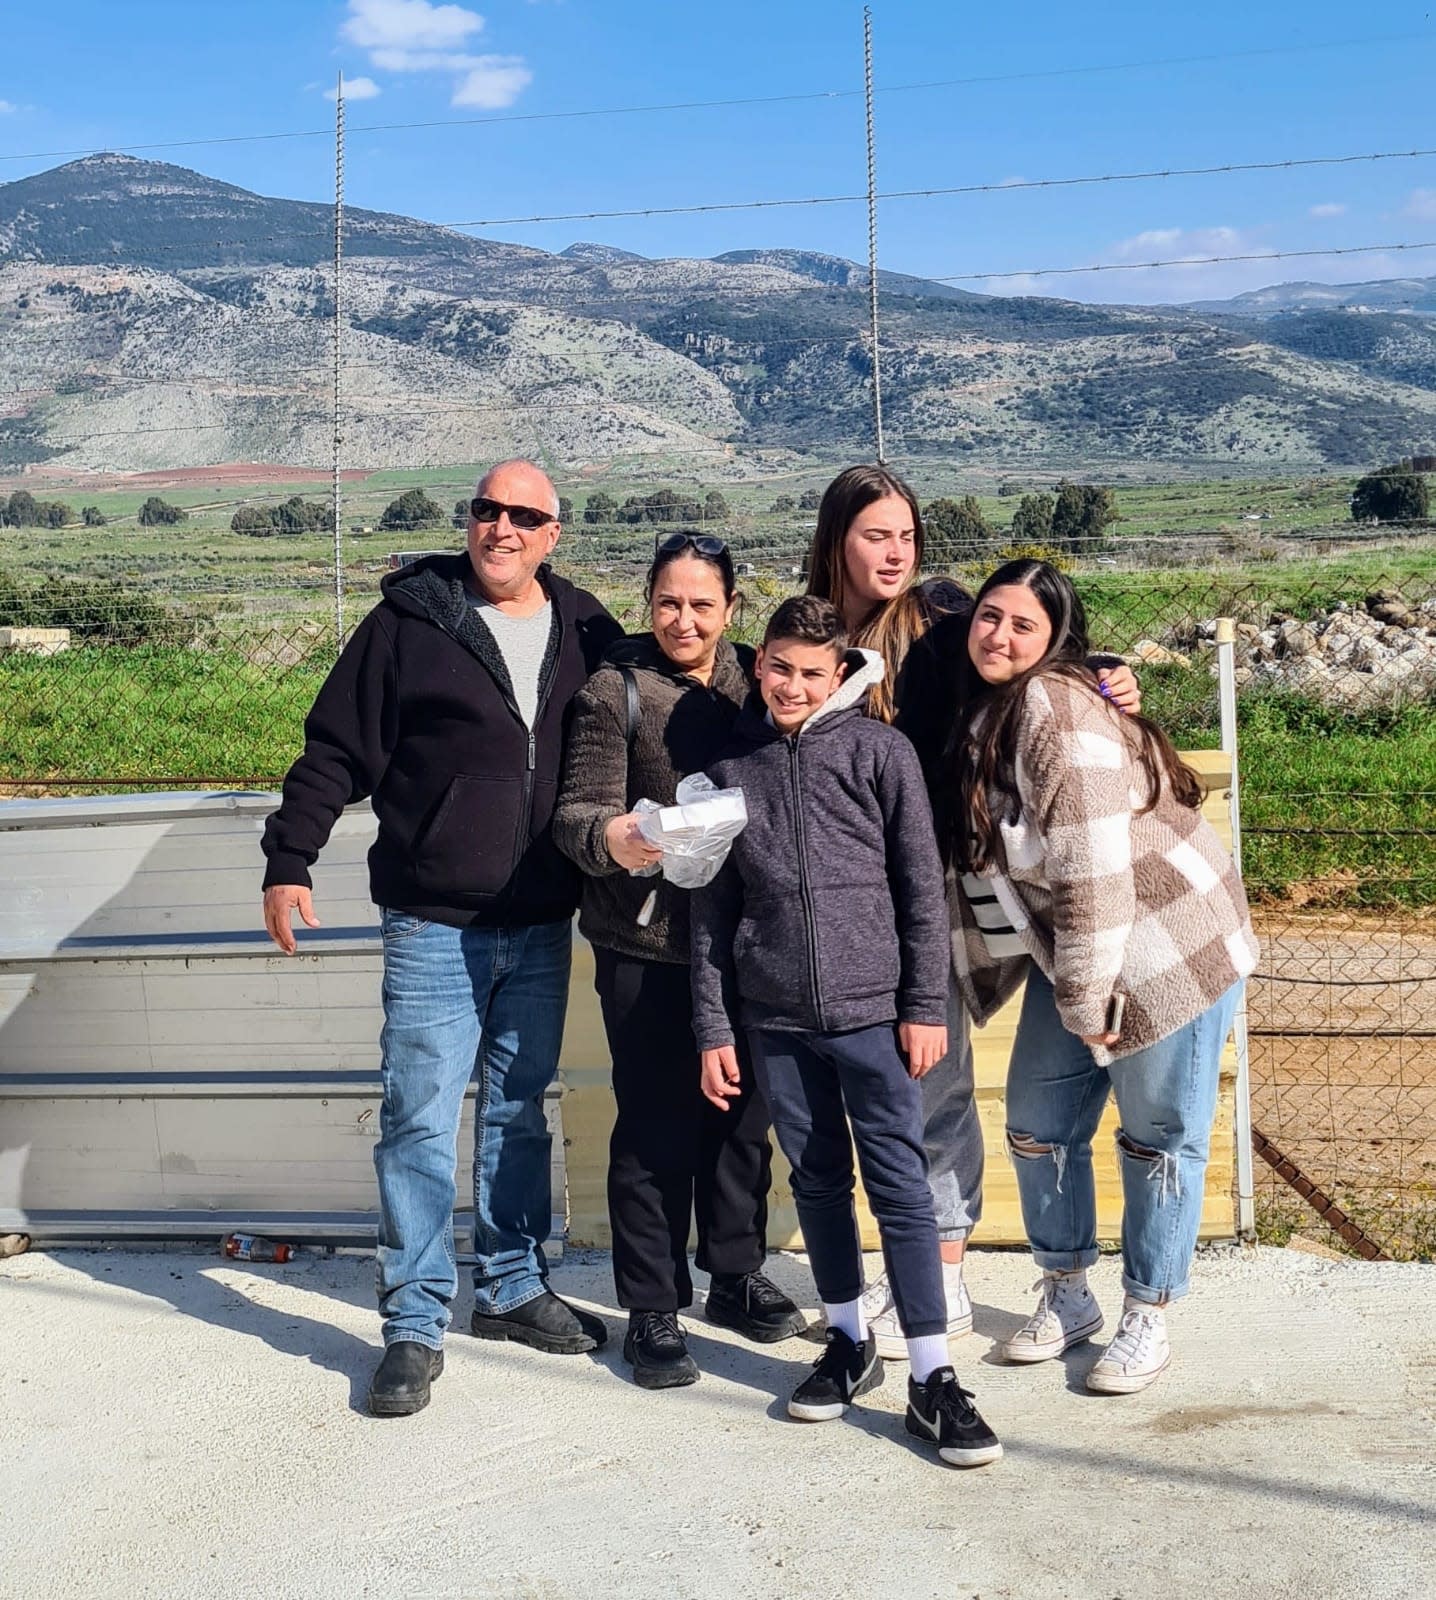  Roni with her parents Sharon and Eyal, her sister Yael and brother Alon (credit: COURTESY OF THE FAMILY)